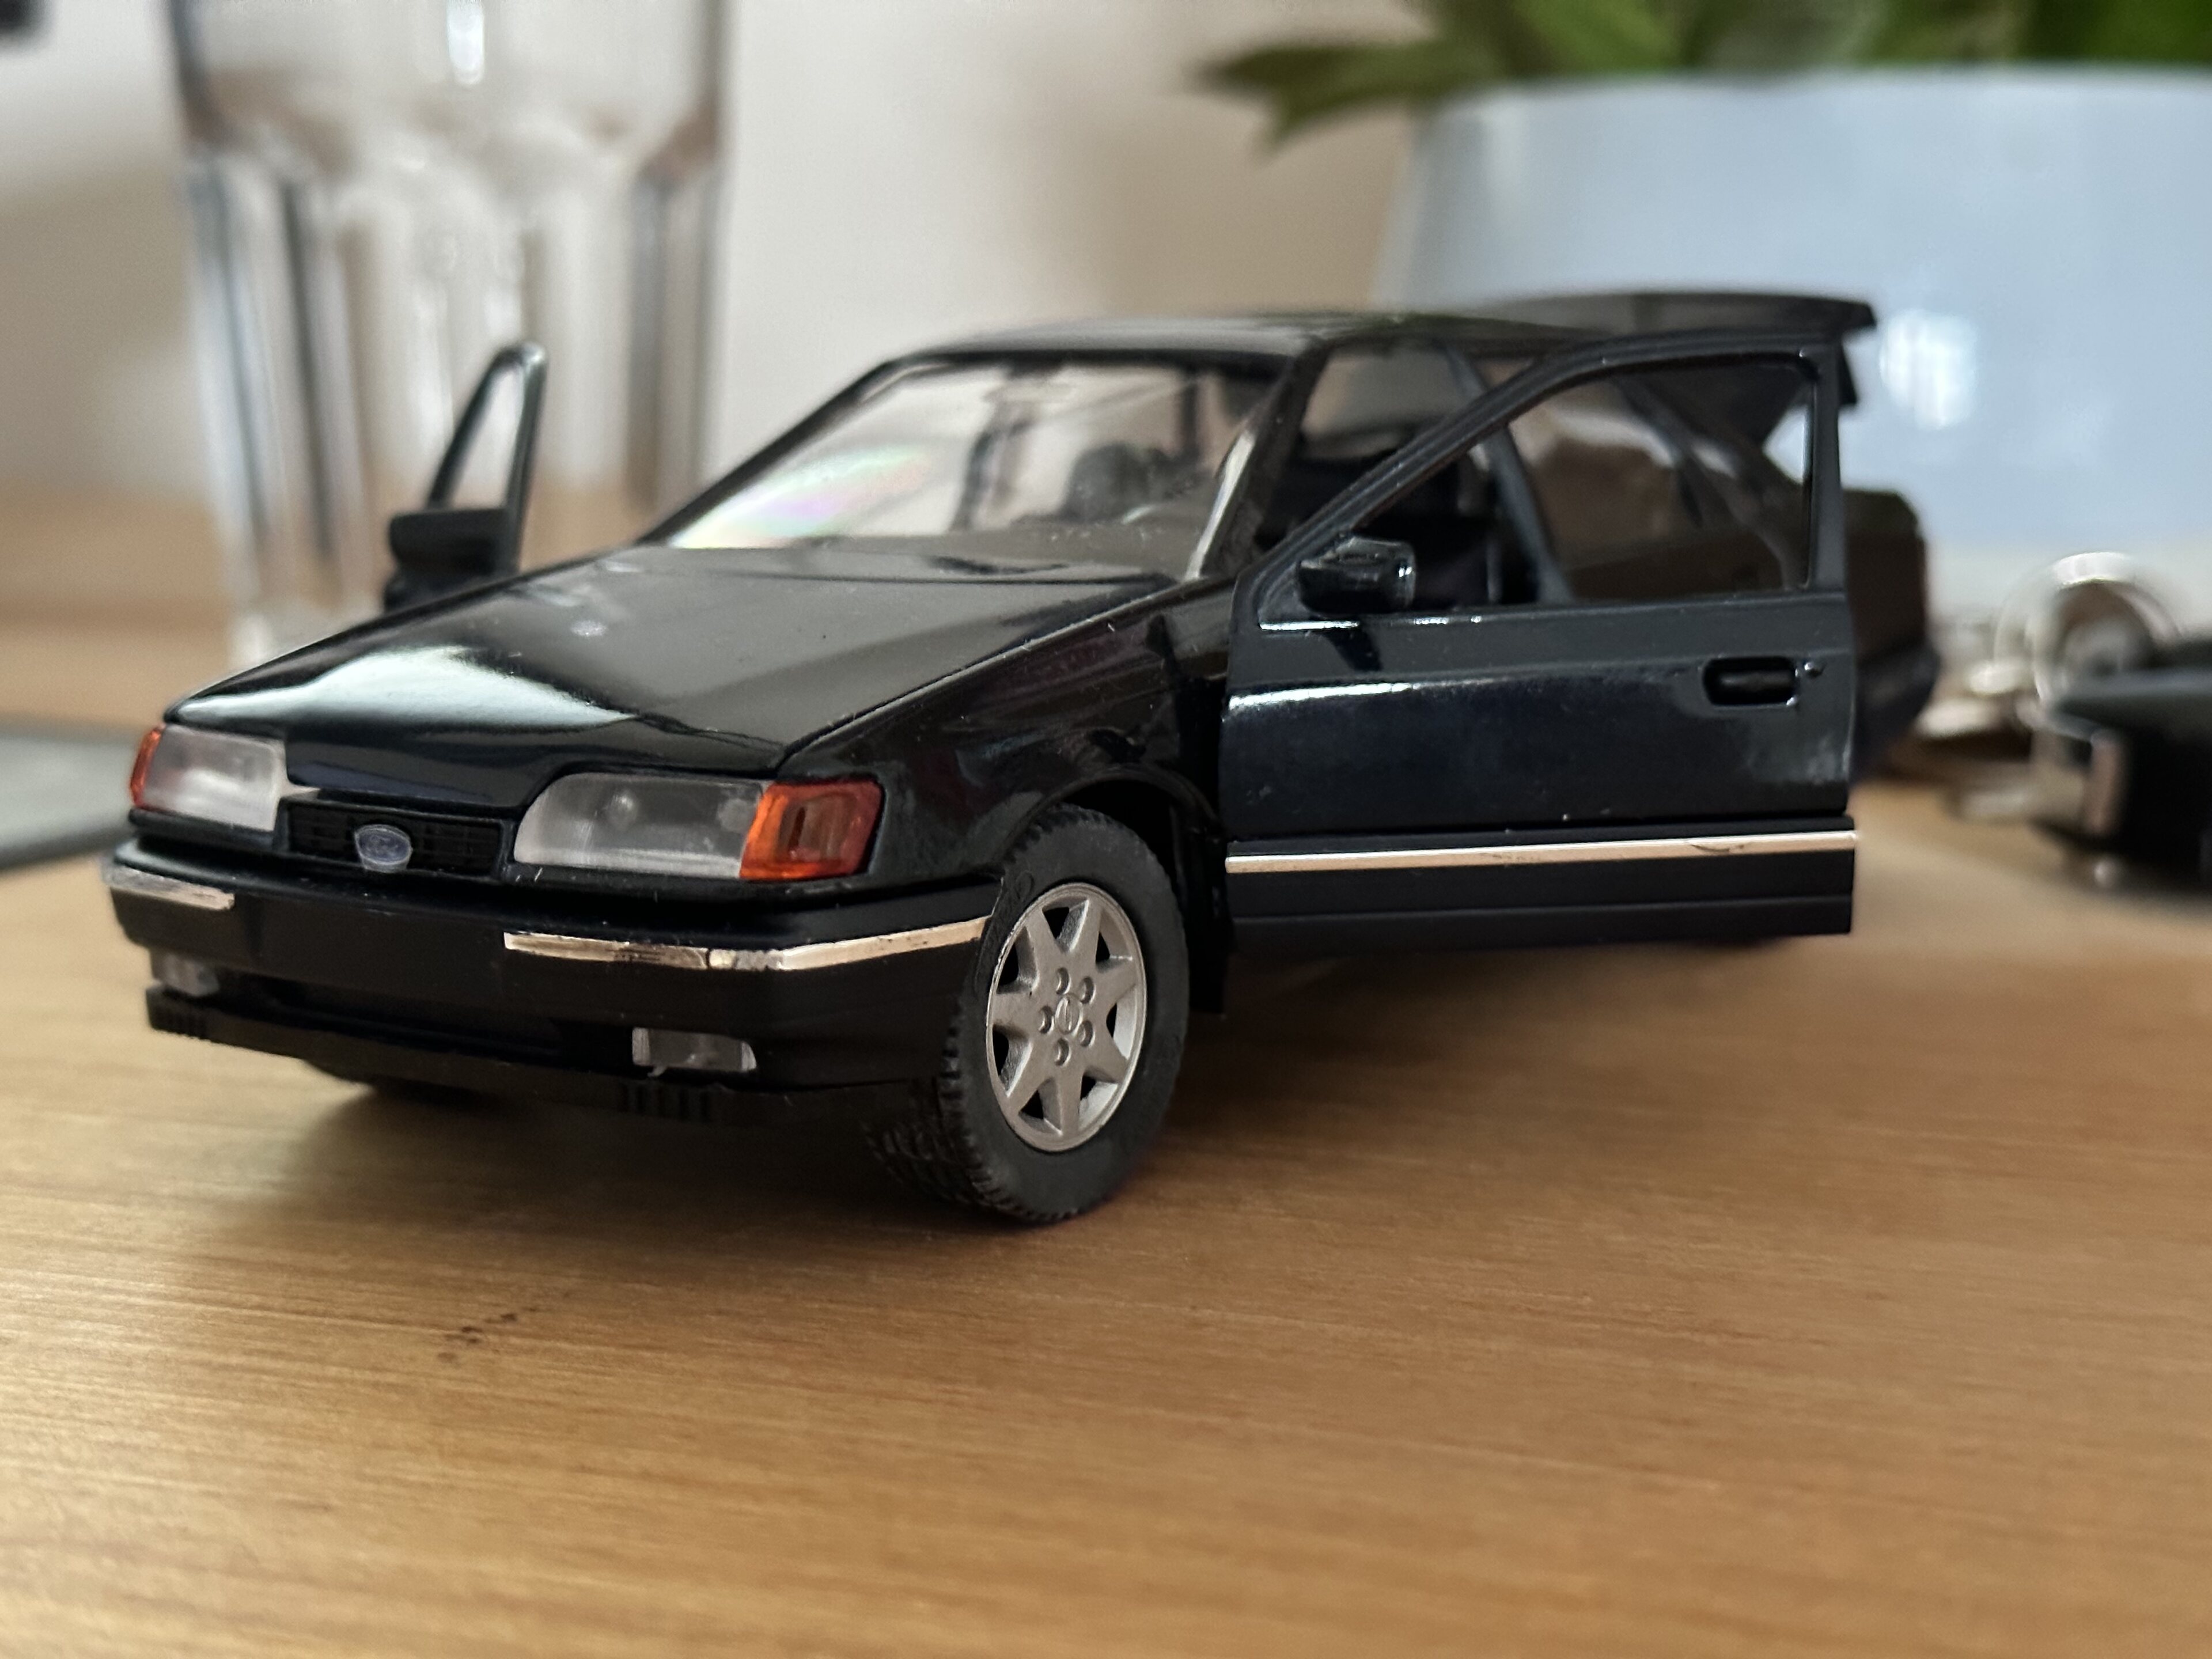 Ford Granada - Attainable 90s Interesting Ford - Page 1 - Readers' Cars - PistonHeads UK - The image showcases a black toy car, which is a replica of a Ford Escort. It appears to be a collectible item, possibly part of an automobile collection or a hobby for the owner. The car is positioned on a surface that could be a table or a countertop, and there's a key placed in its ignition. In the background, there seems to be a white wall and some other objects, but they are not clearly distinguishable.